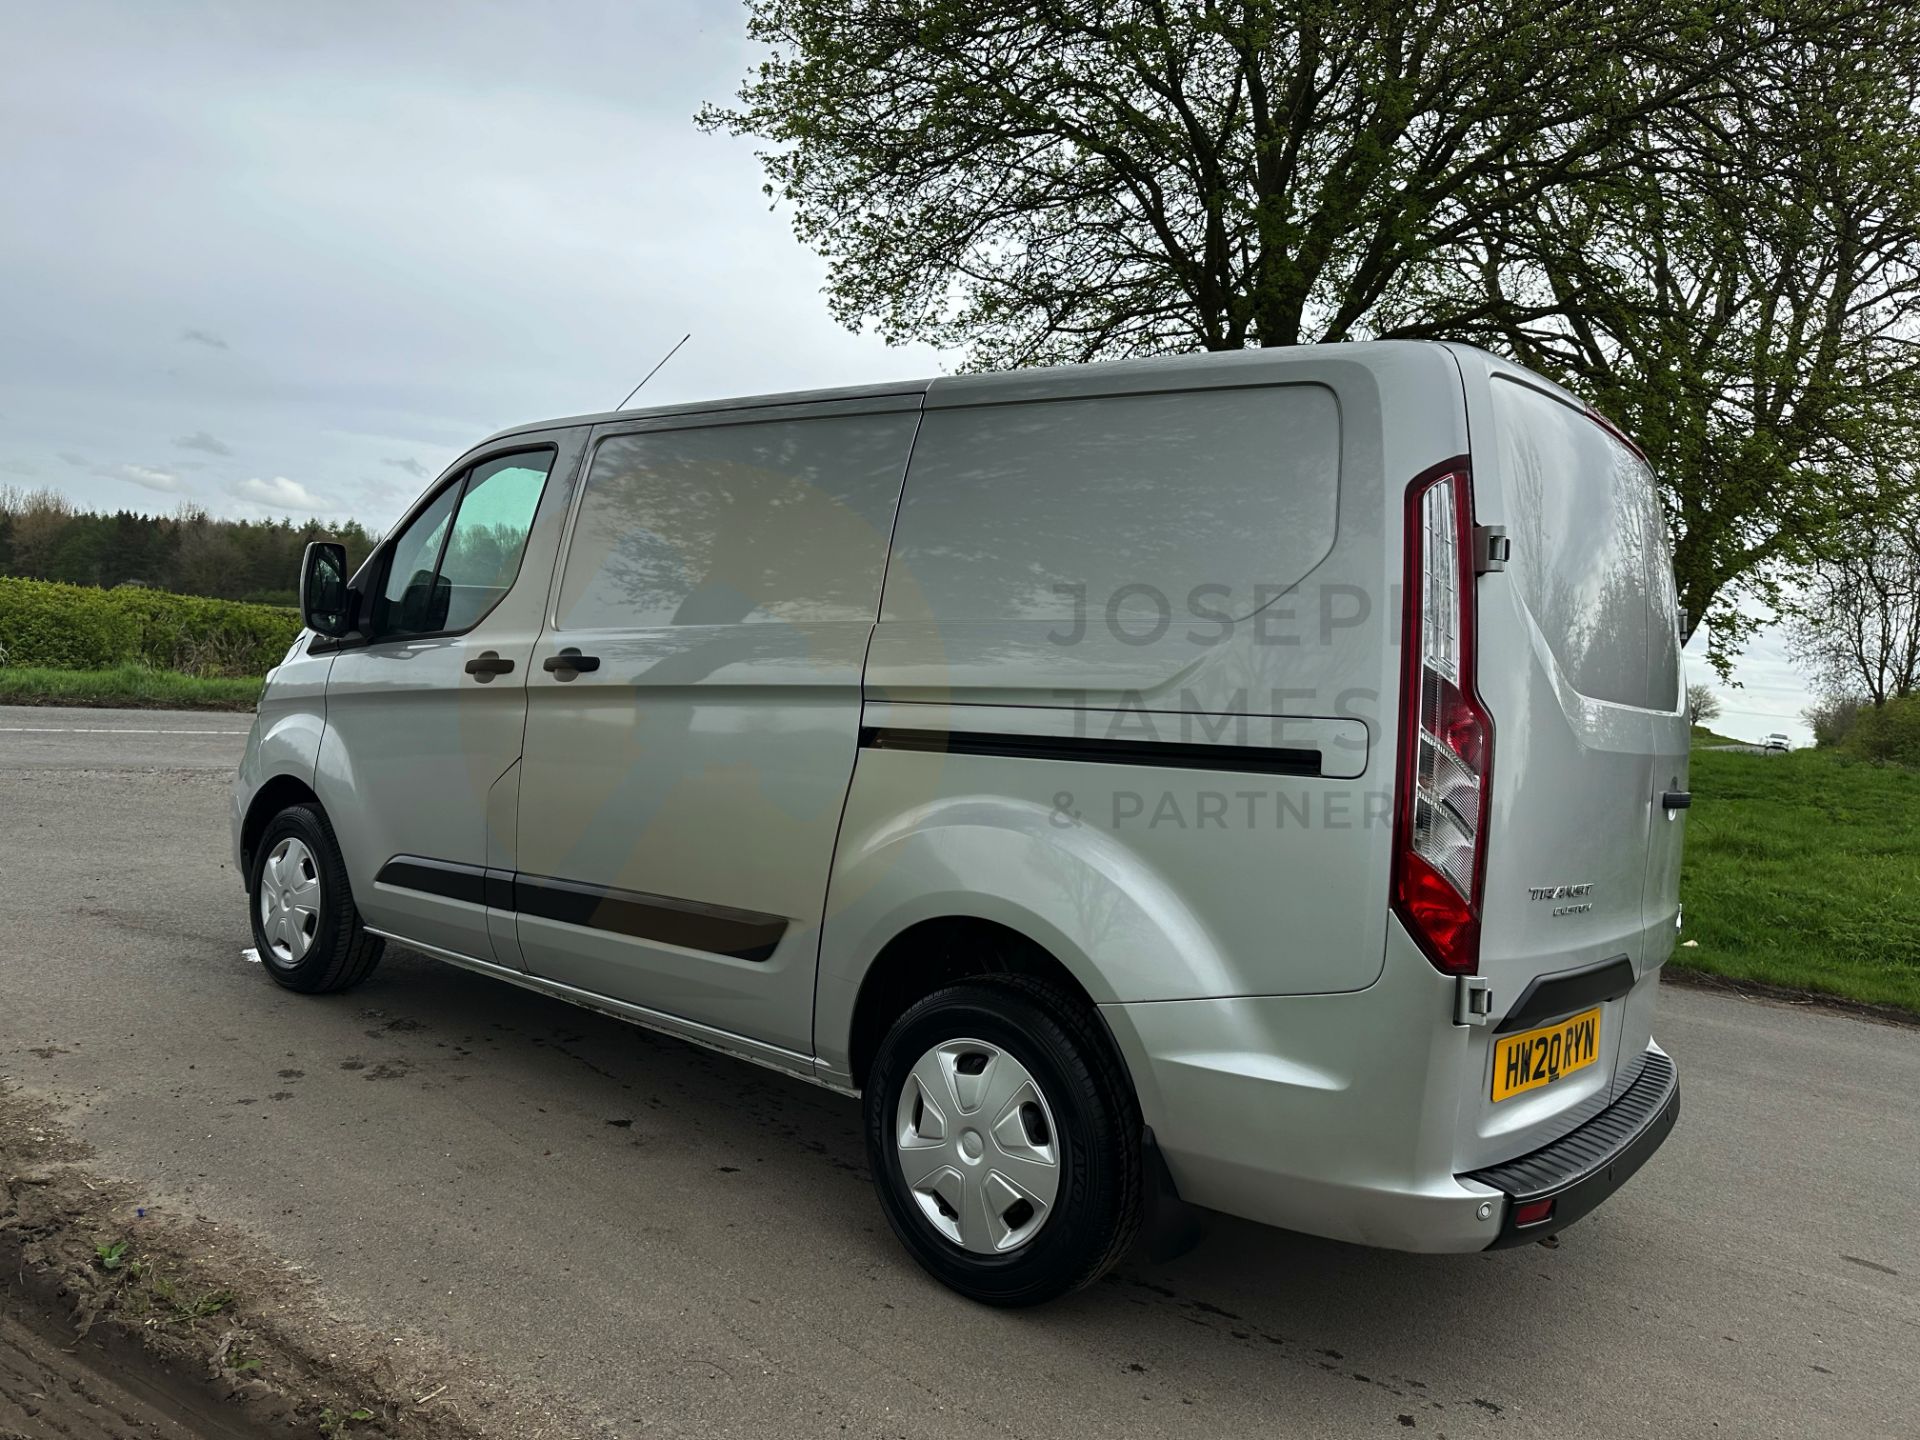 (ON SALE) FORD TRANSIT CUSTOM "TREND" 2.0TDCI (130) 20 REG -1 OWNER- SILVER -GREAT SPEC -LOW MILEAGE - Image 10 of 38